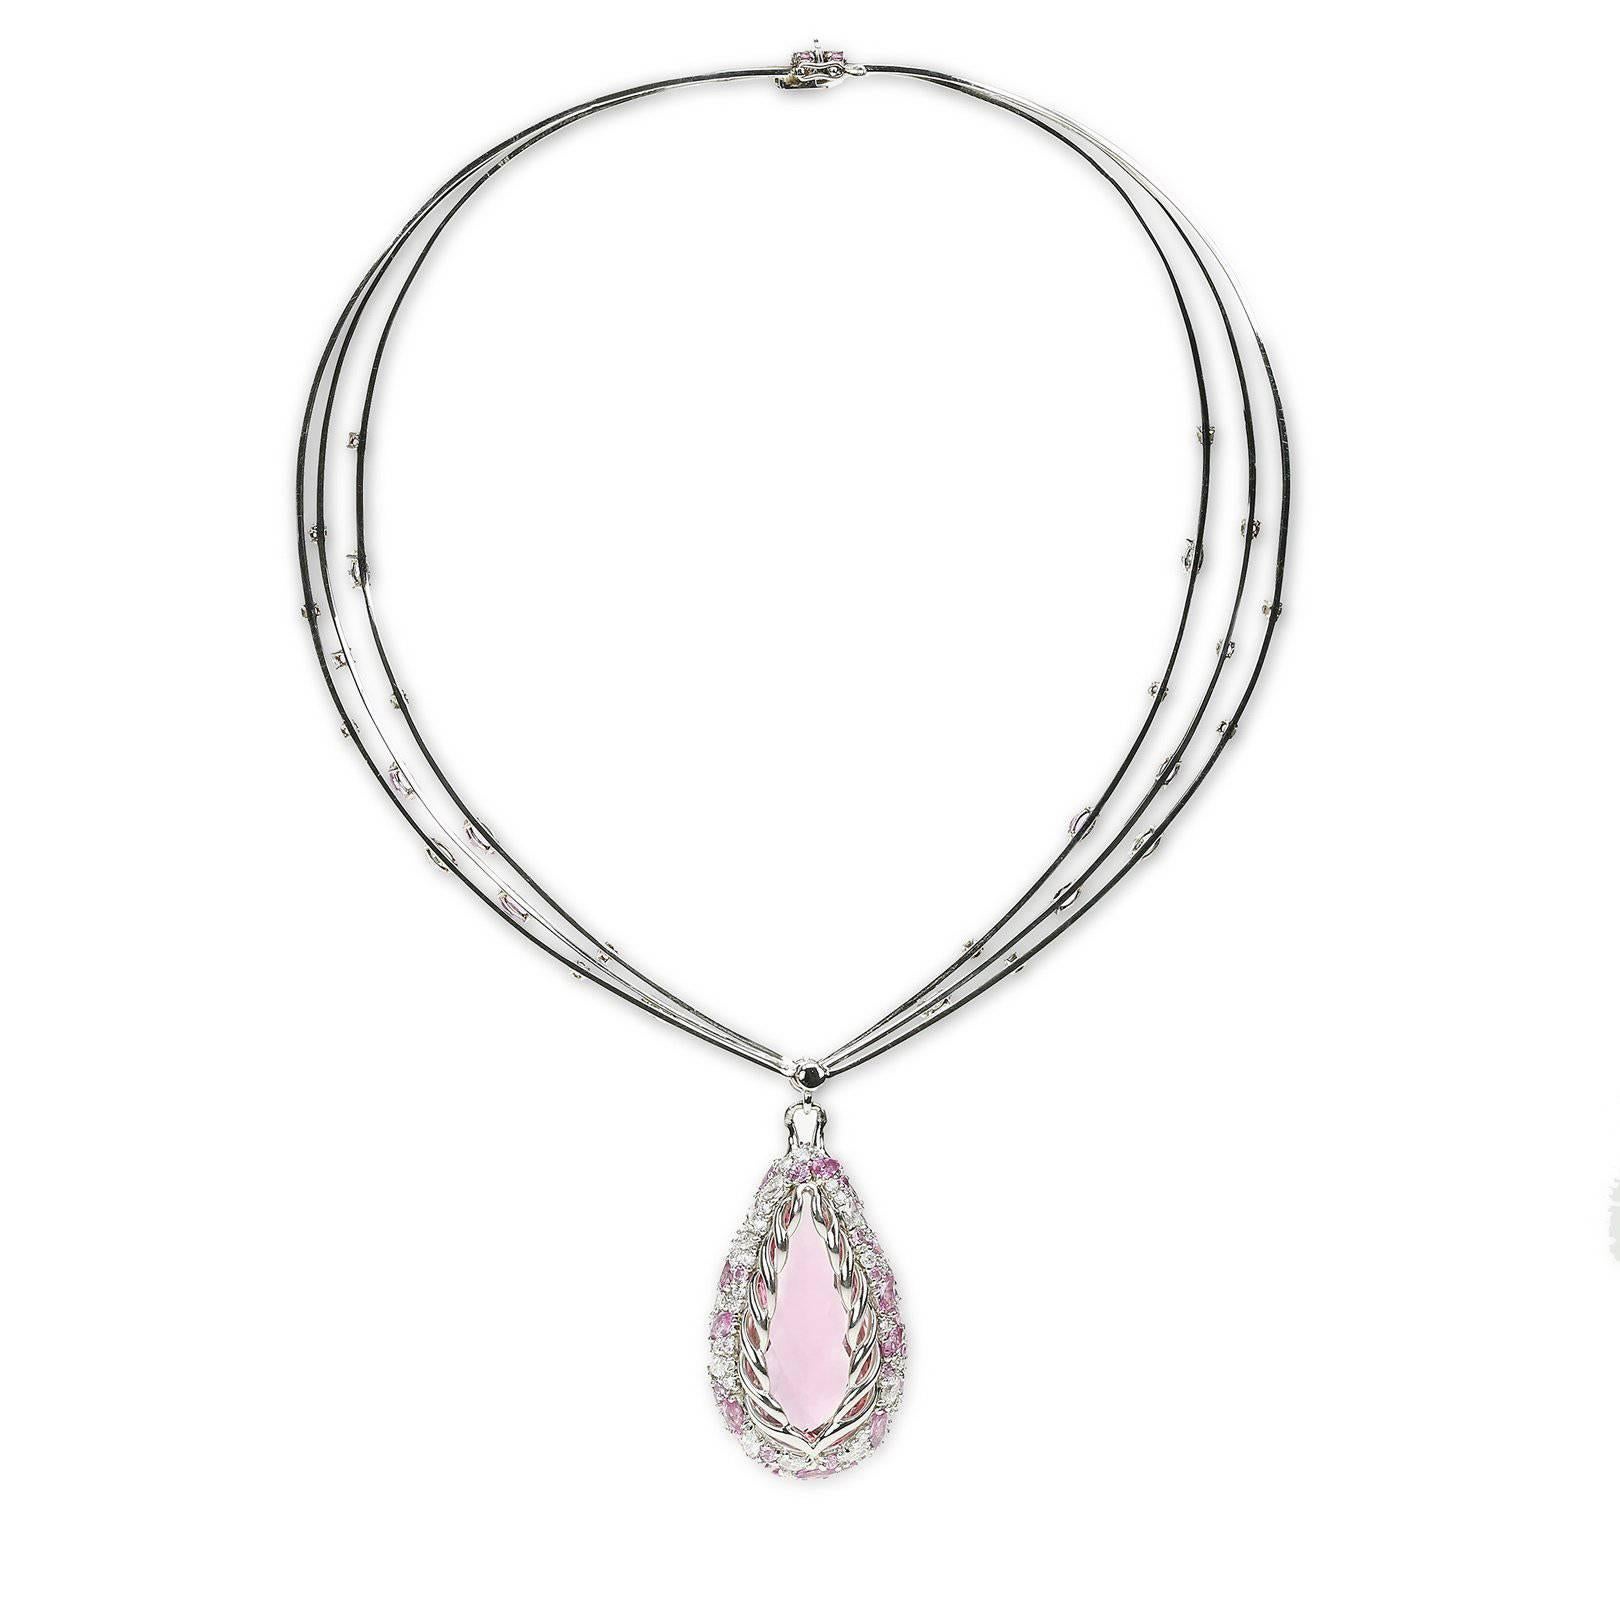 A "Samuel Getz" Platinum Choker and Pendant Featuring an Exceptional and Extraordinary Rare Mixed Cut Pear Shaped Morganite, 50.15 Carats [37.50 x 19.58 x 14.11 mm.], 85 Round, Marquise and Pear Shaped Pink Sapphires, 13.59 Carats, and 84